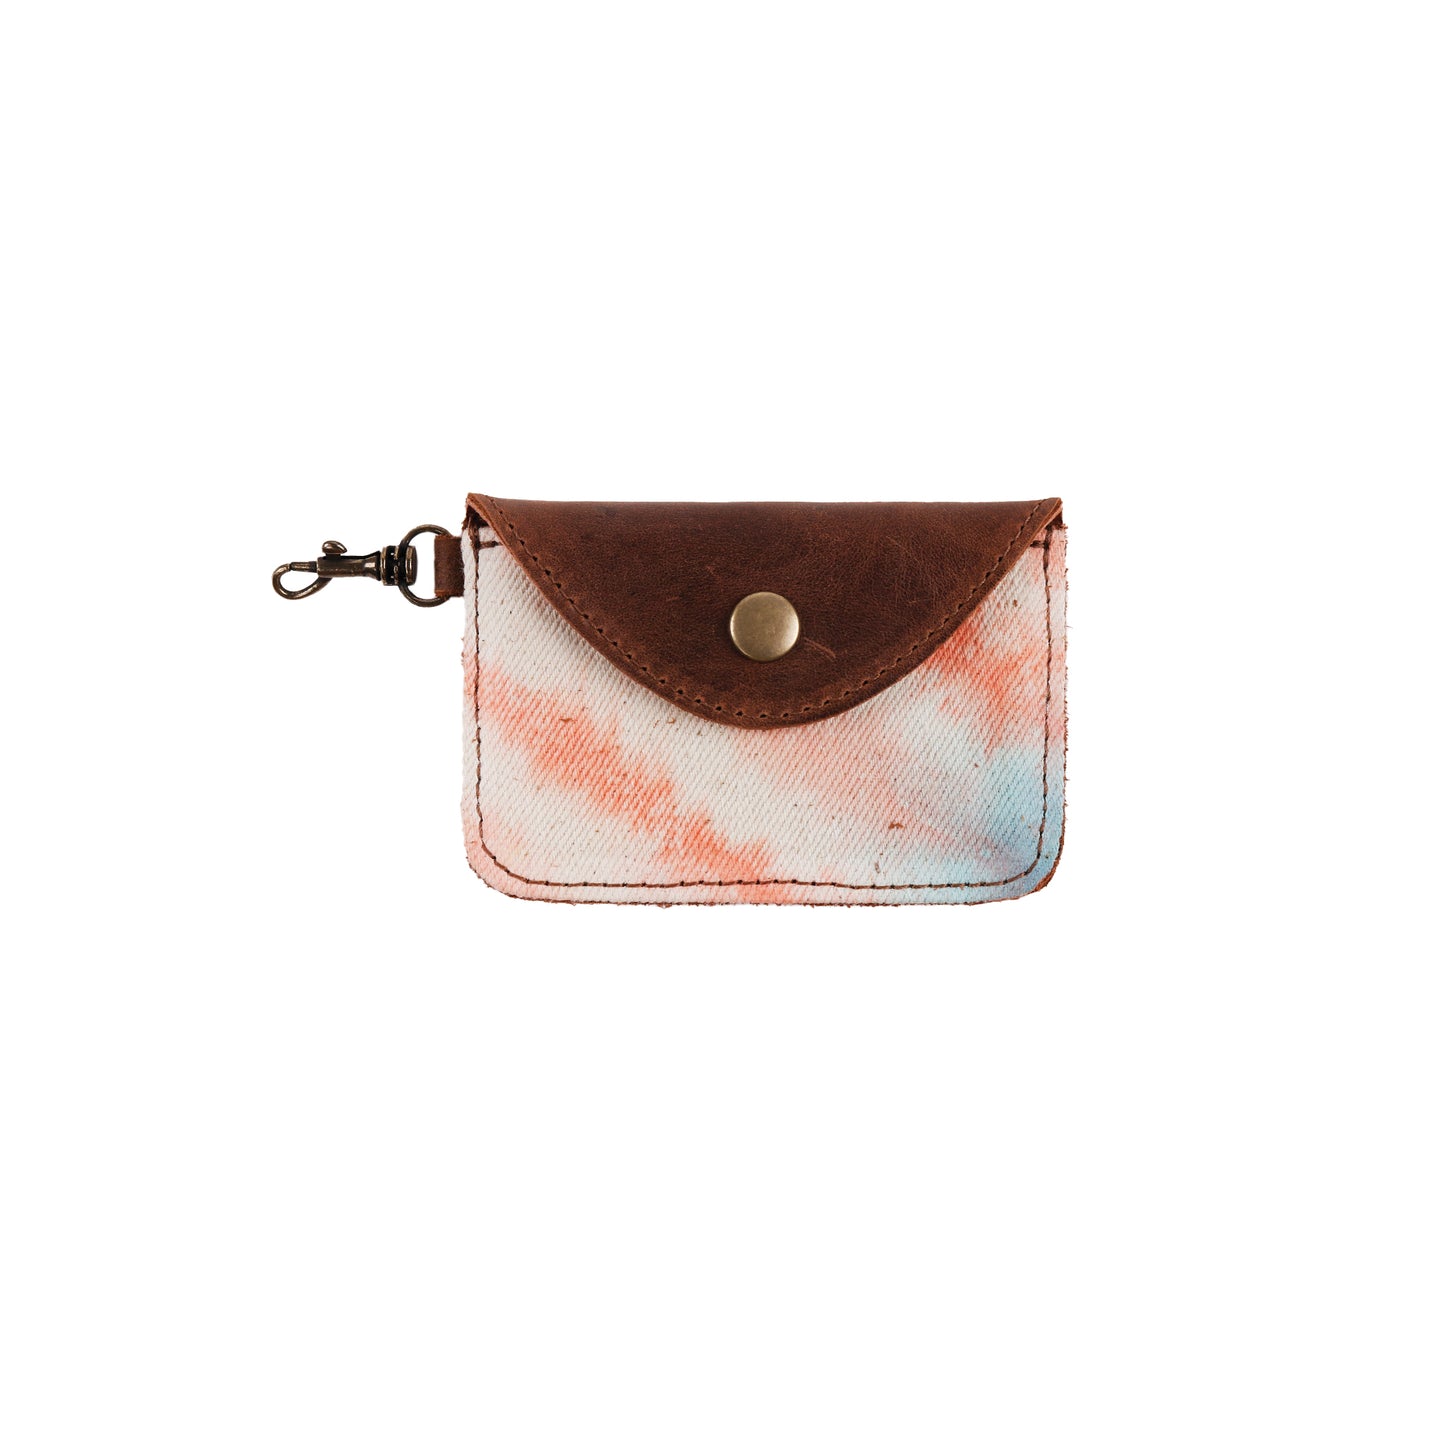 CARD WALLET - TIE DYE - UPCYCLED DENIM - CAOBA LEATHER - NO. 12177